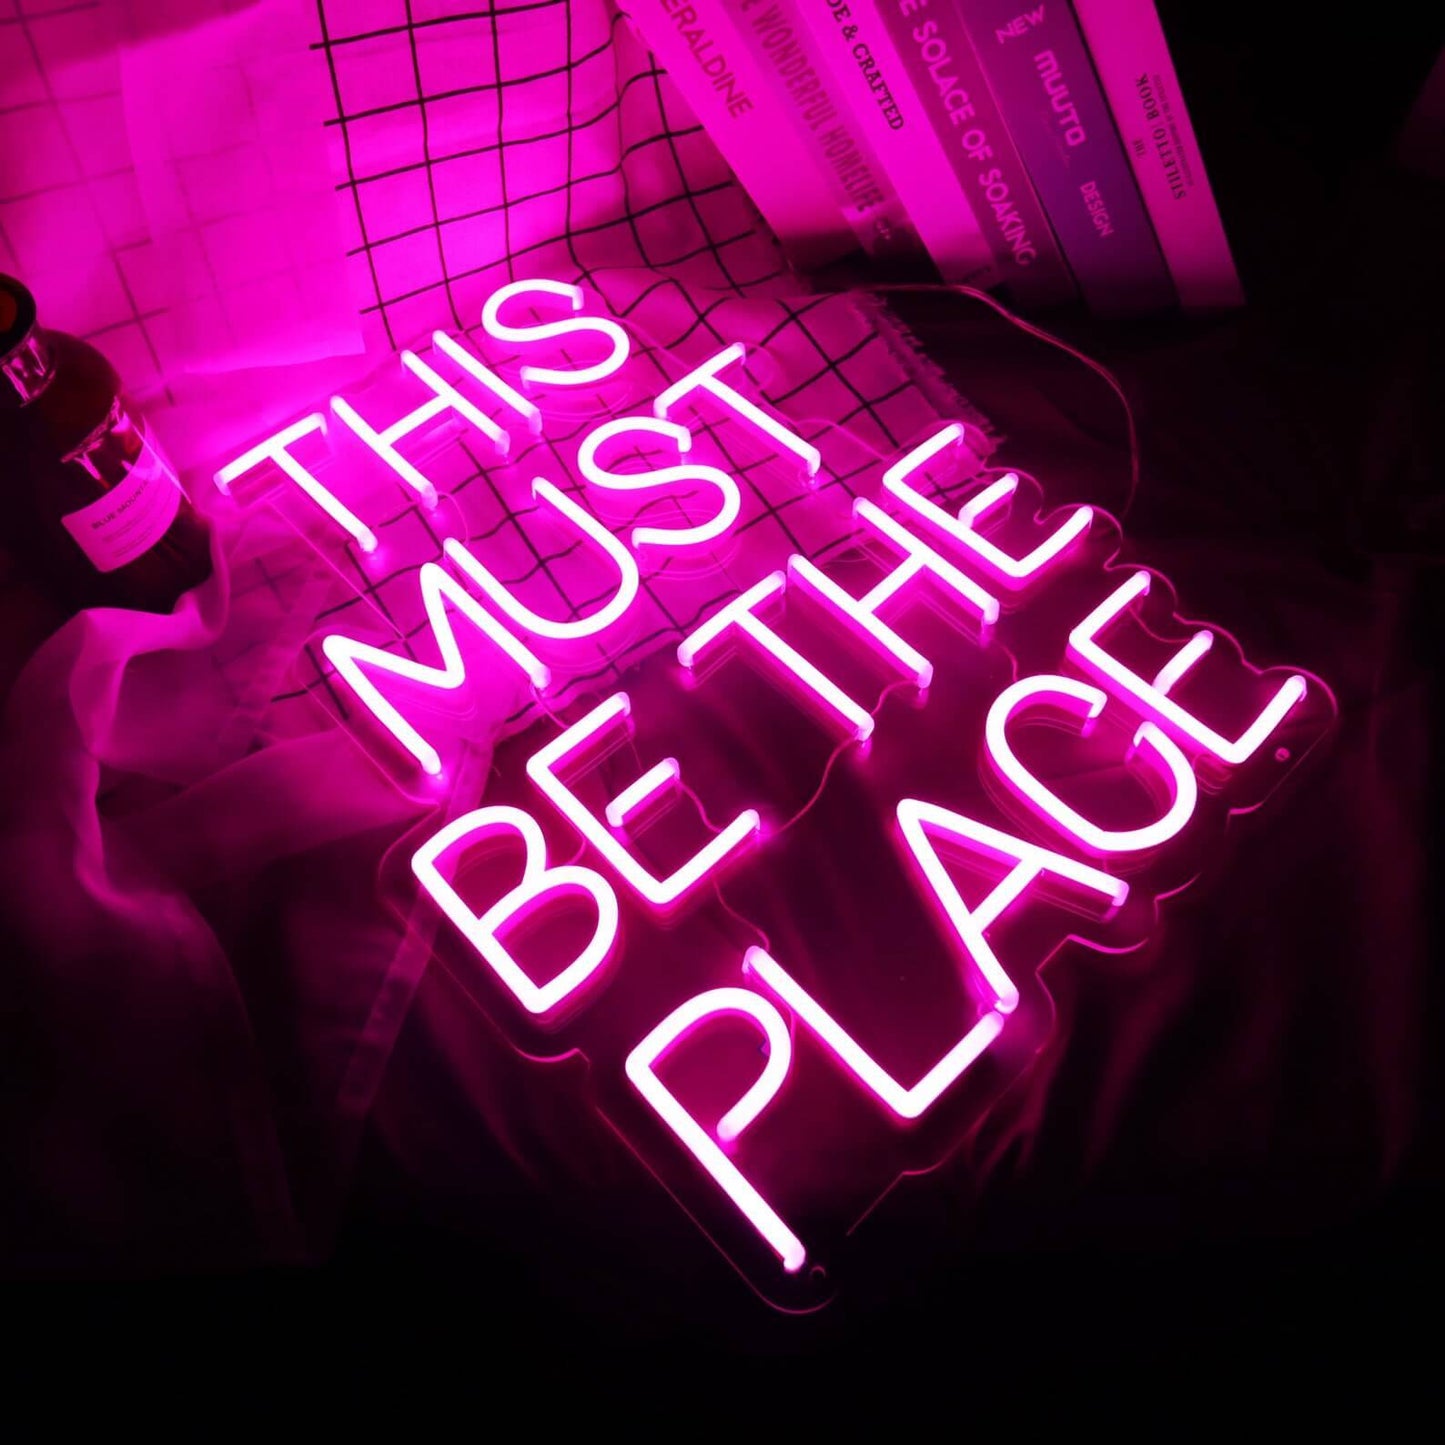 This Must Be The Place Neon Sign Light